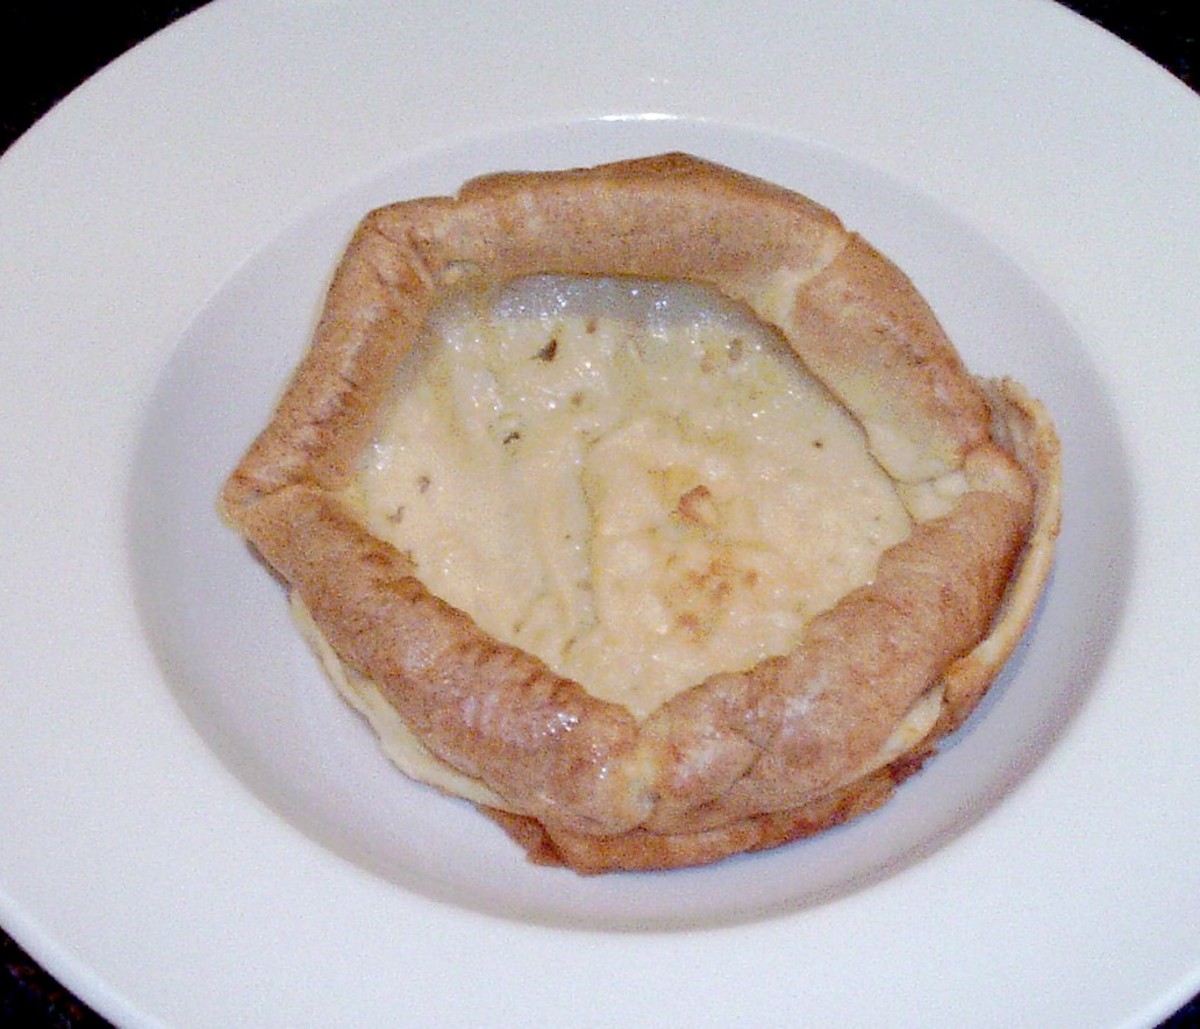 Yorkshire pudding is lifted on to serving plate